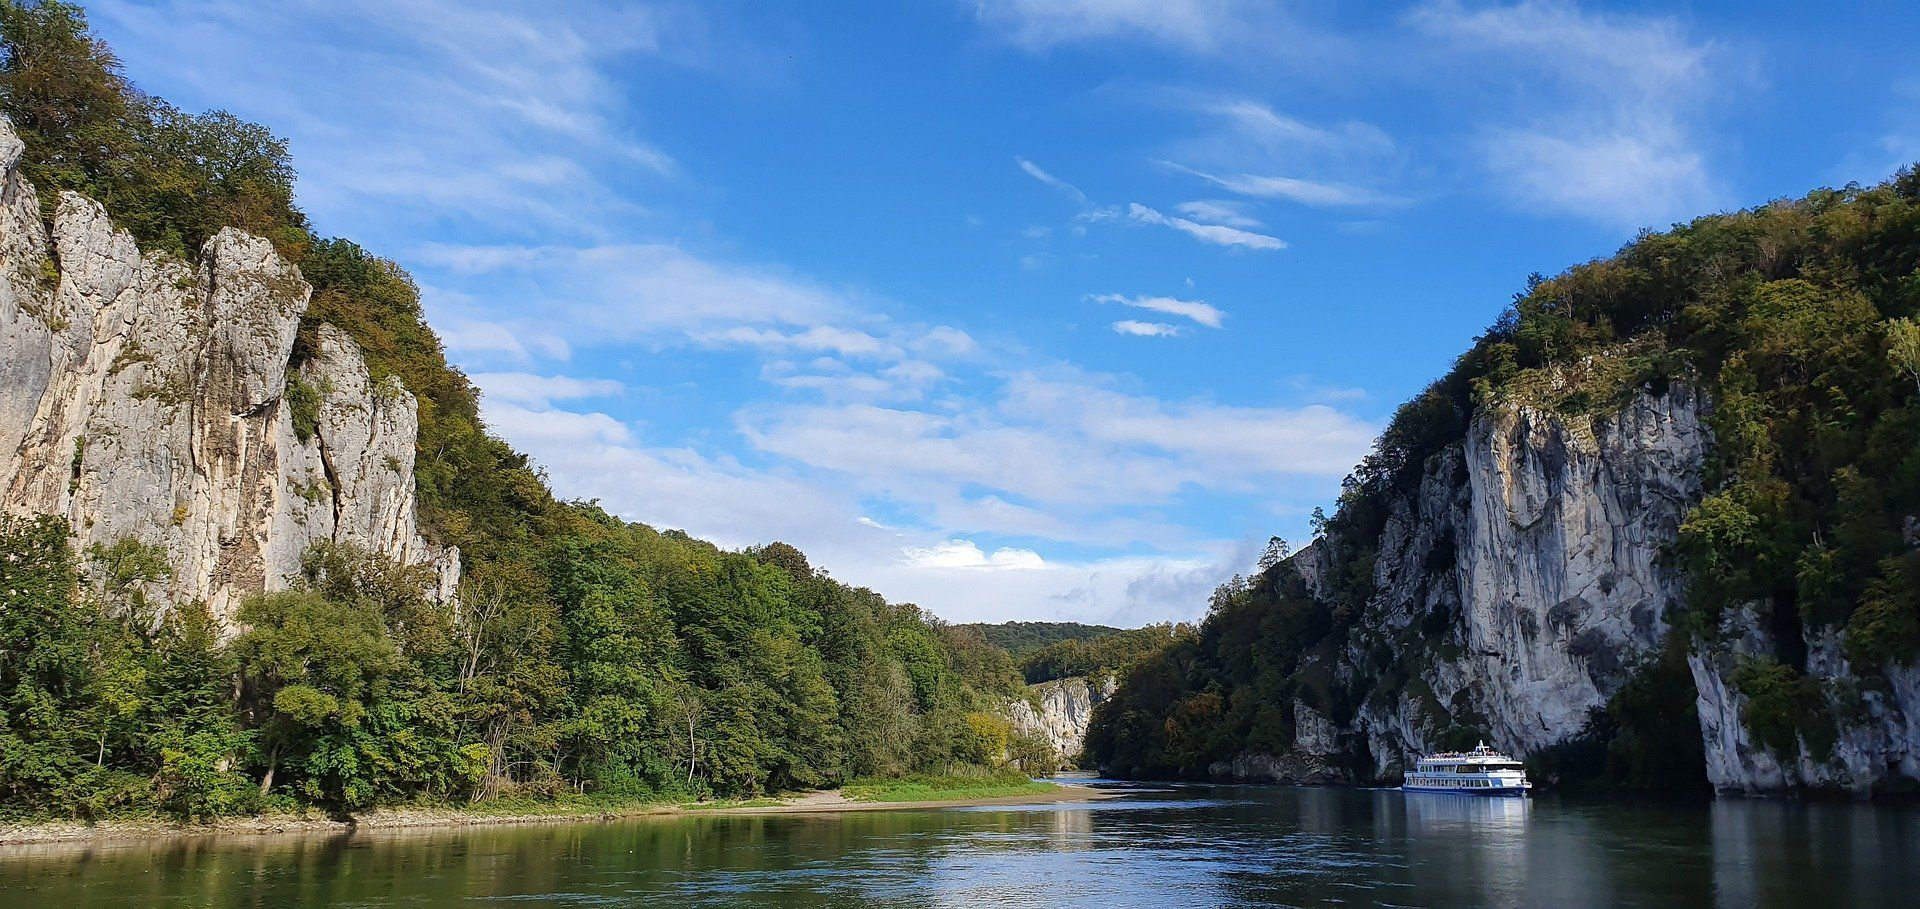 on a boat through the Danube Gorge